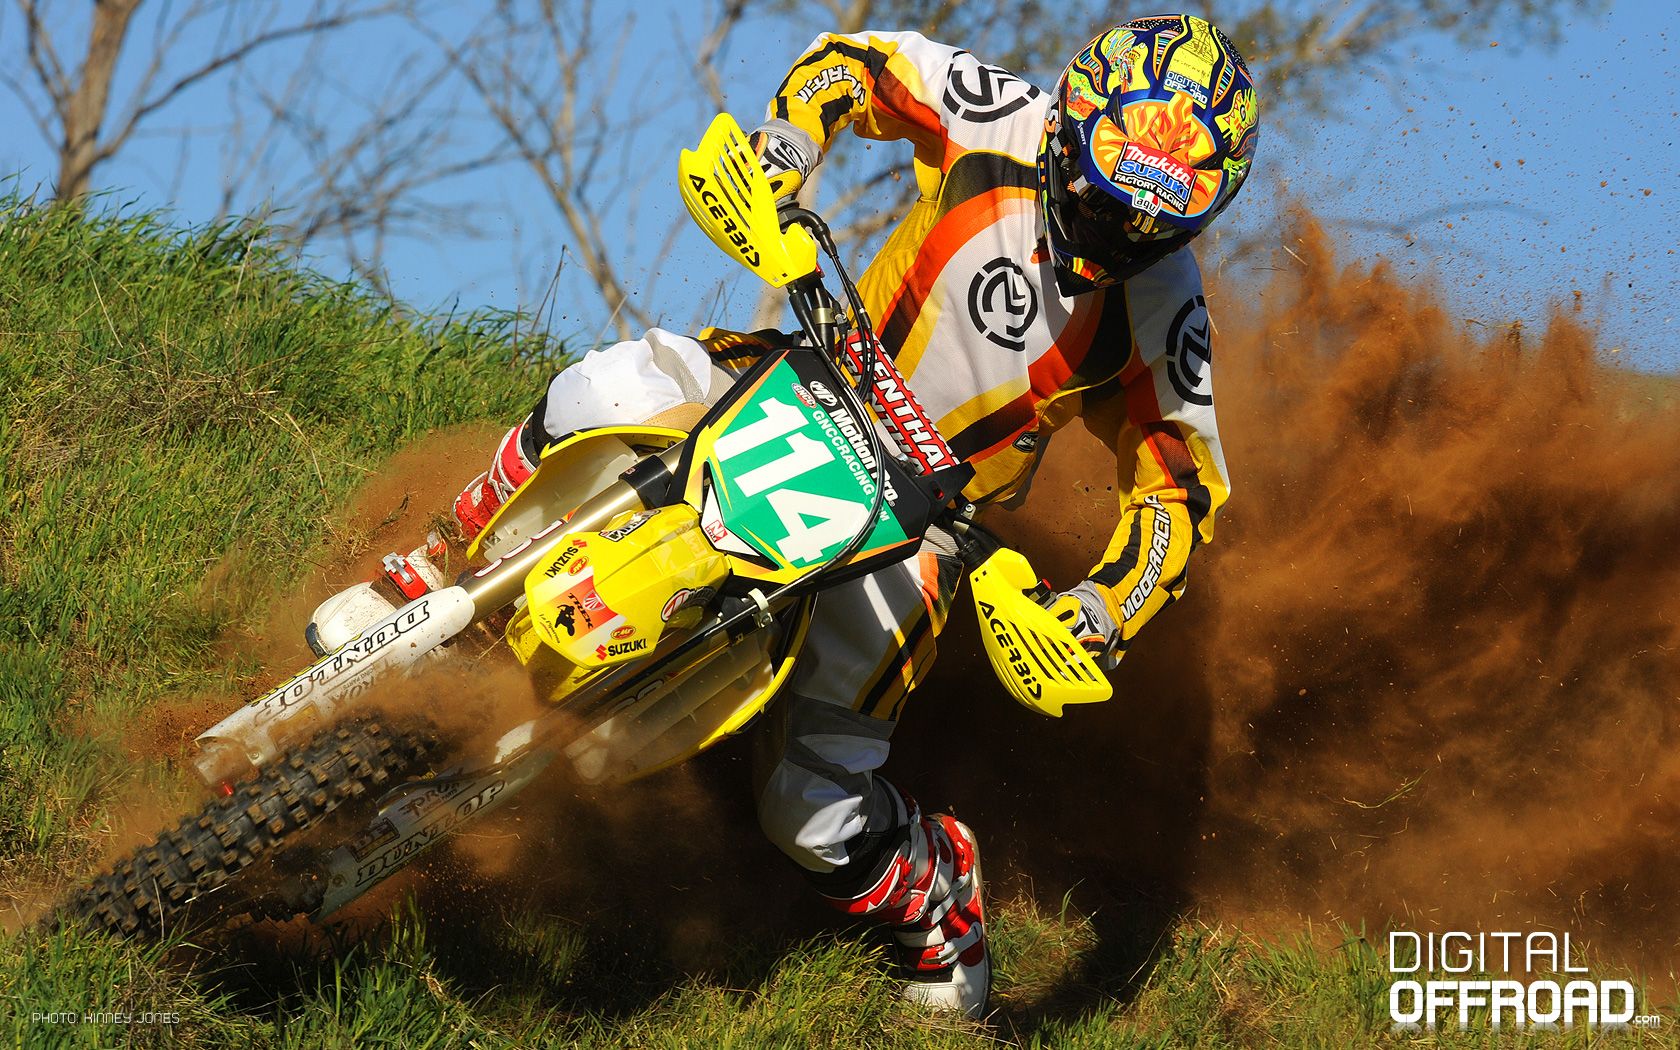 FMF Wallpaper. FMF Wallpaper, FMF 2 Stroke Wallpaper and FMF Exhaust Background